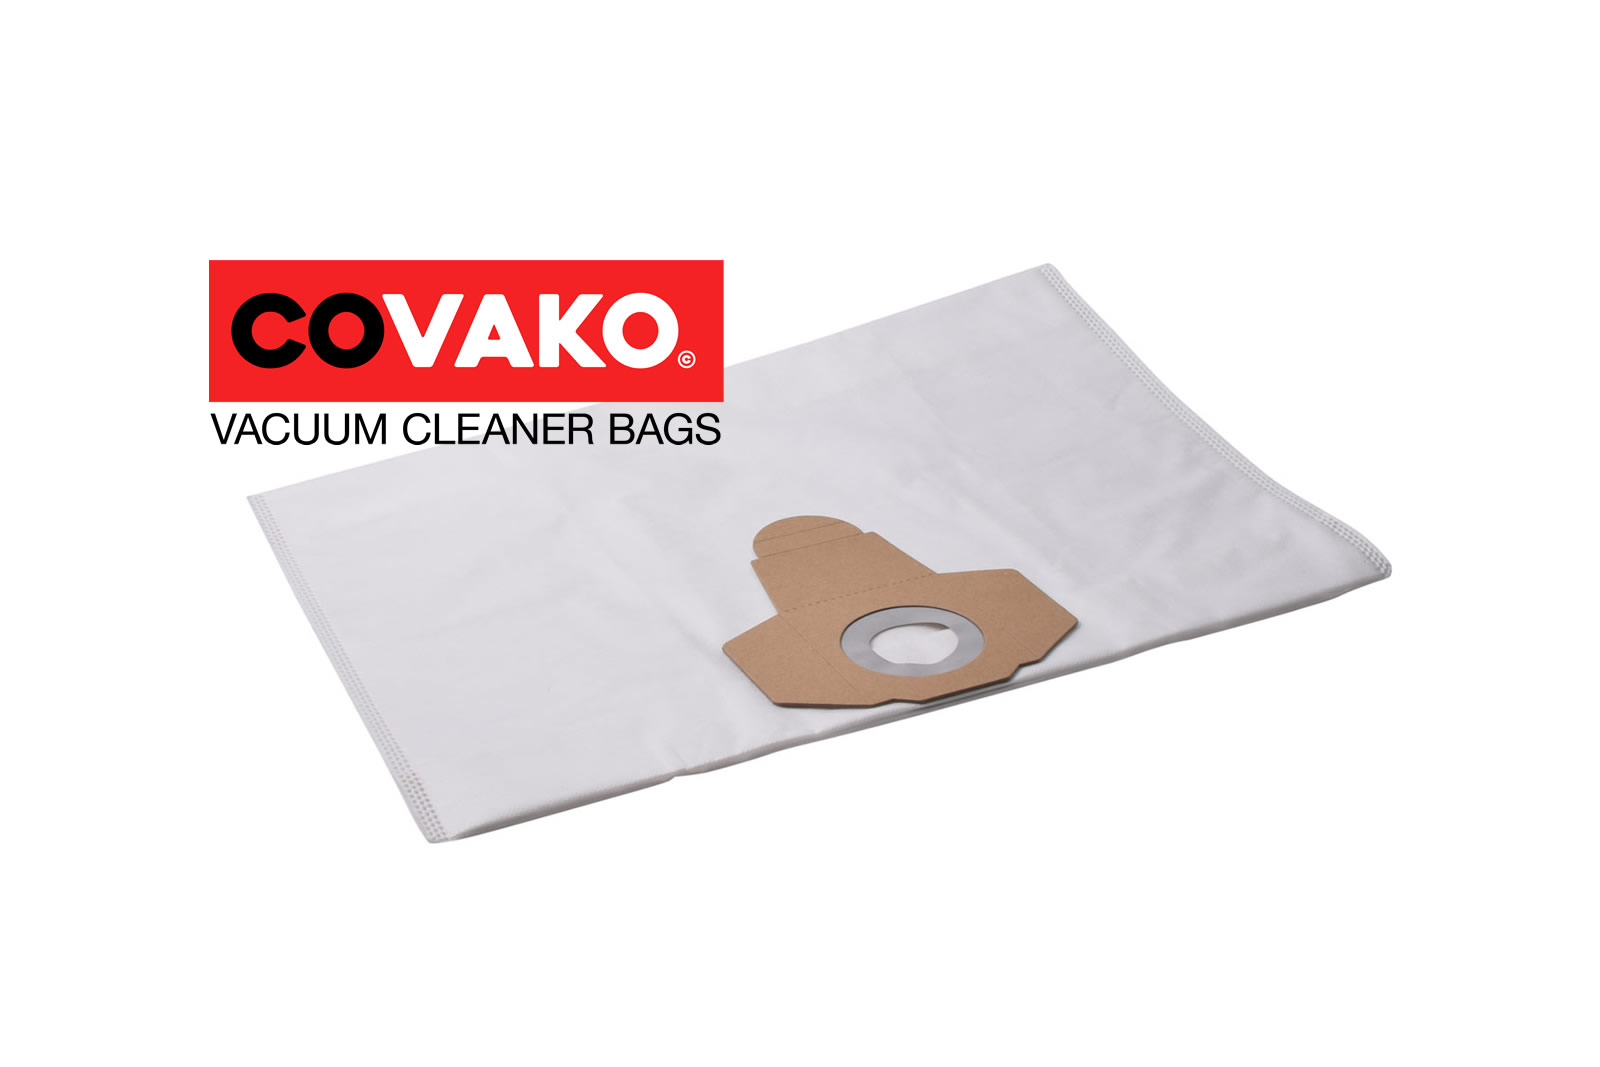 Einhell TE-VC 2230 SAC / Synthesis - Einhell vacuum cleaner bags